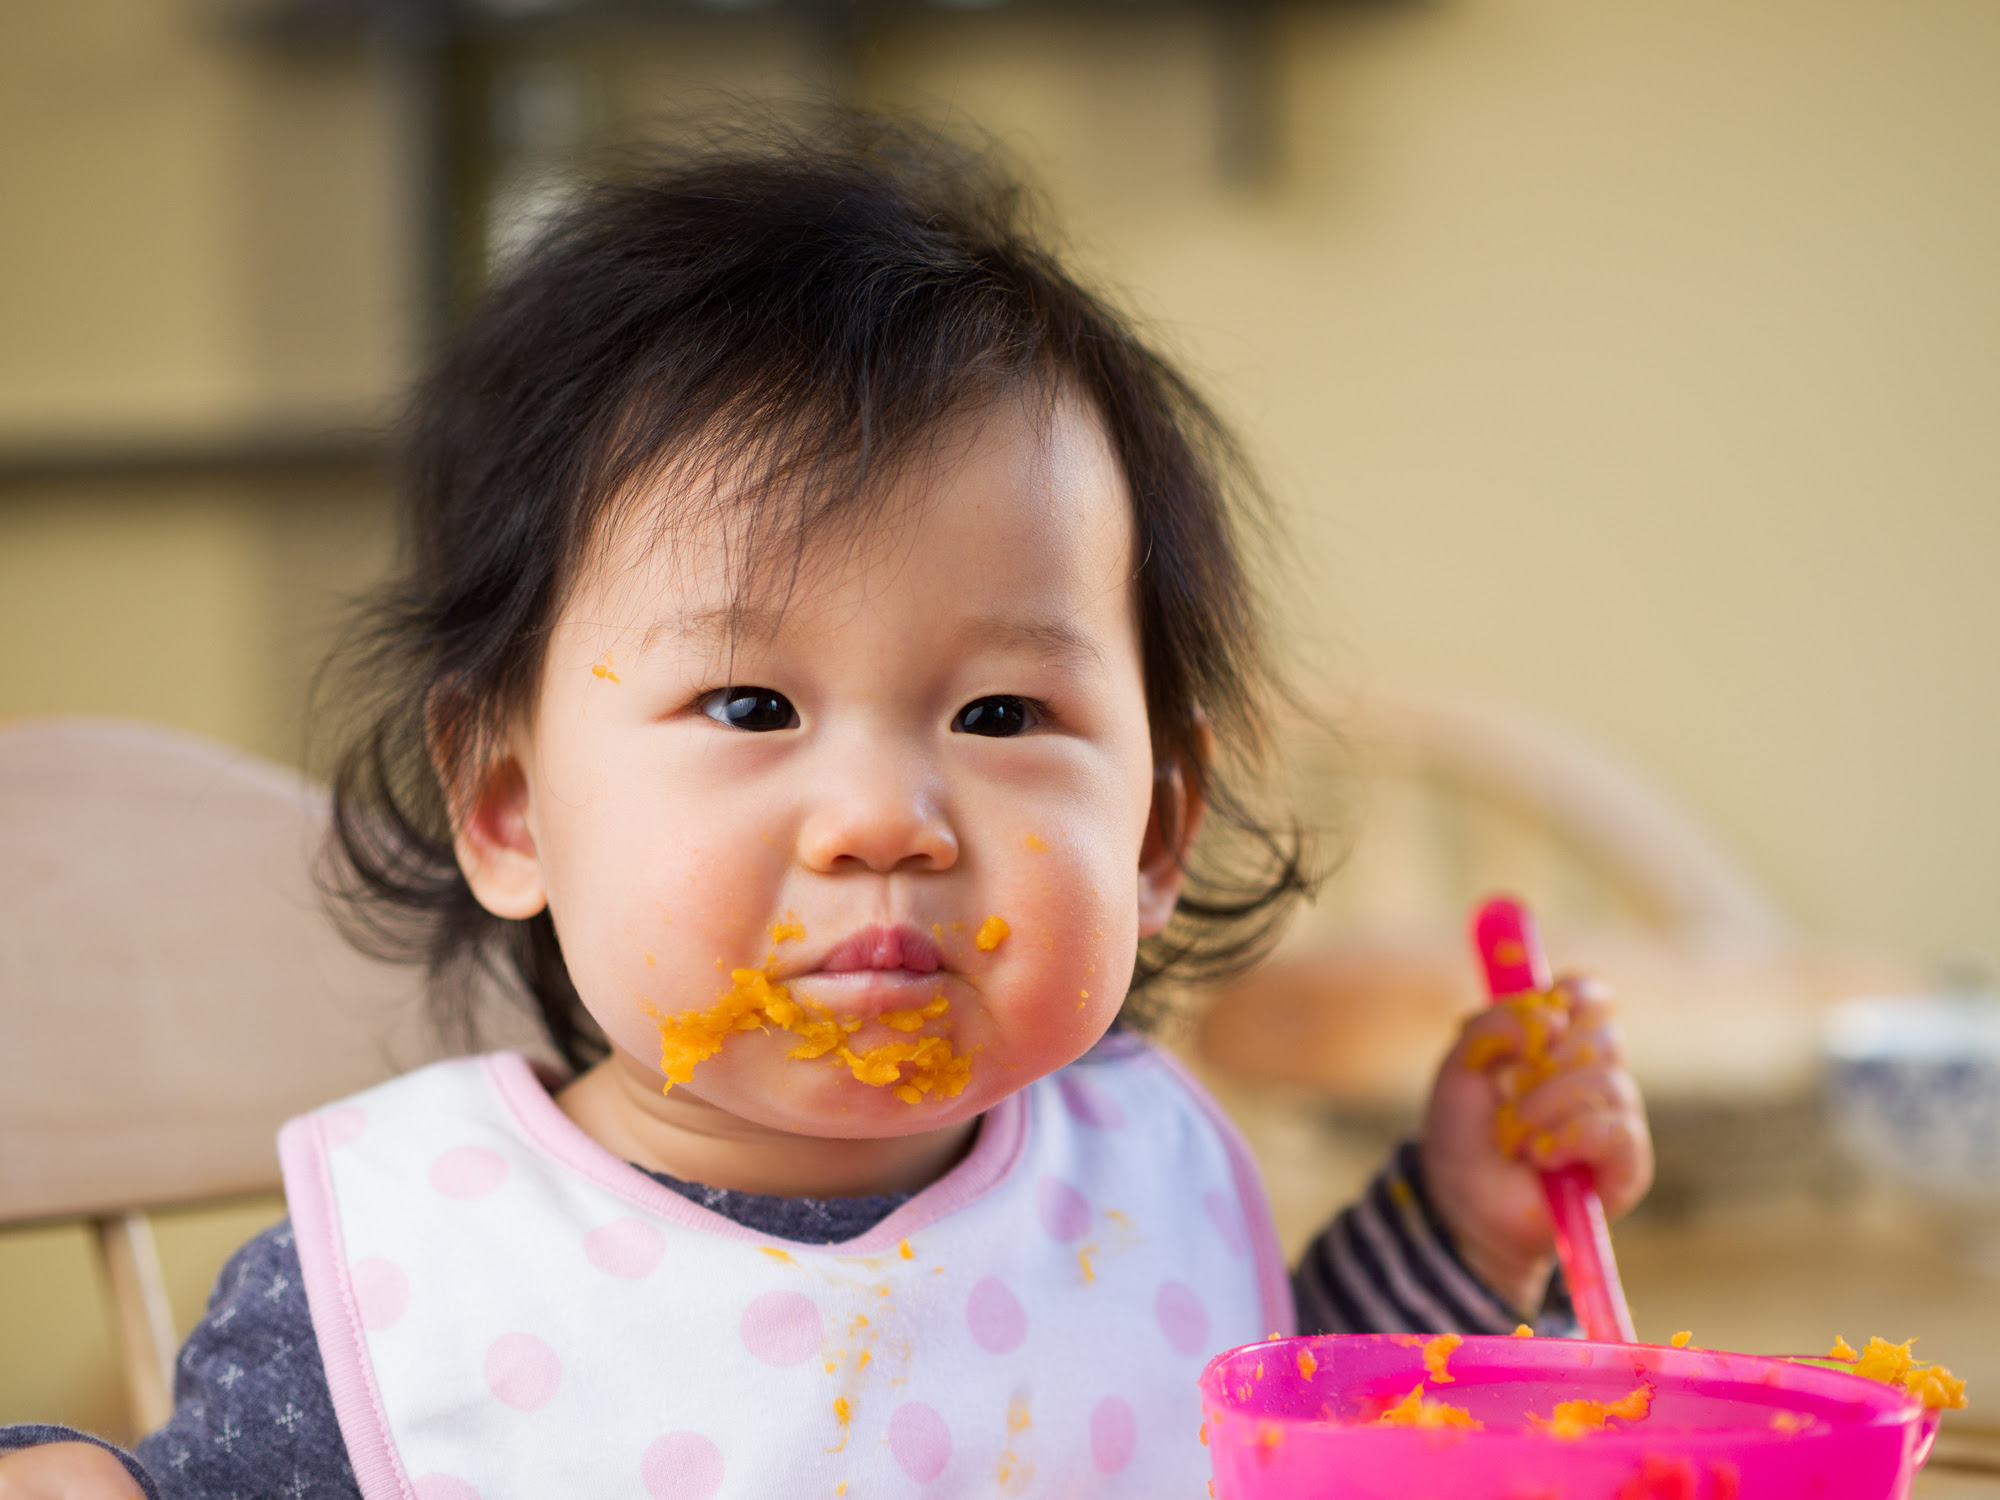 Toddler eating mushed carrots from bowl. 